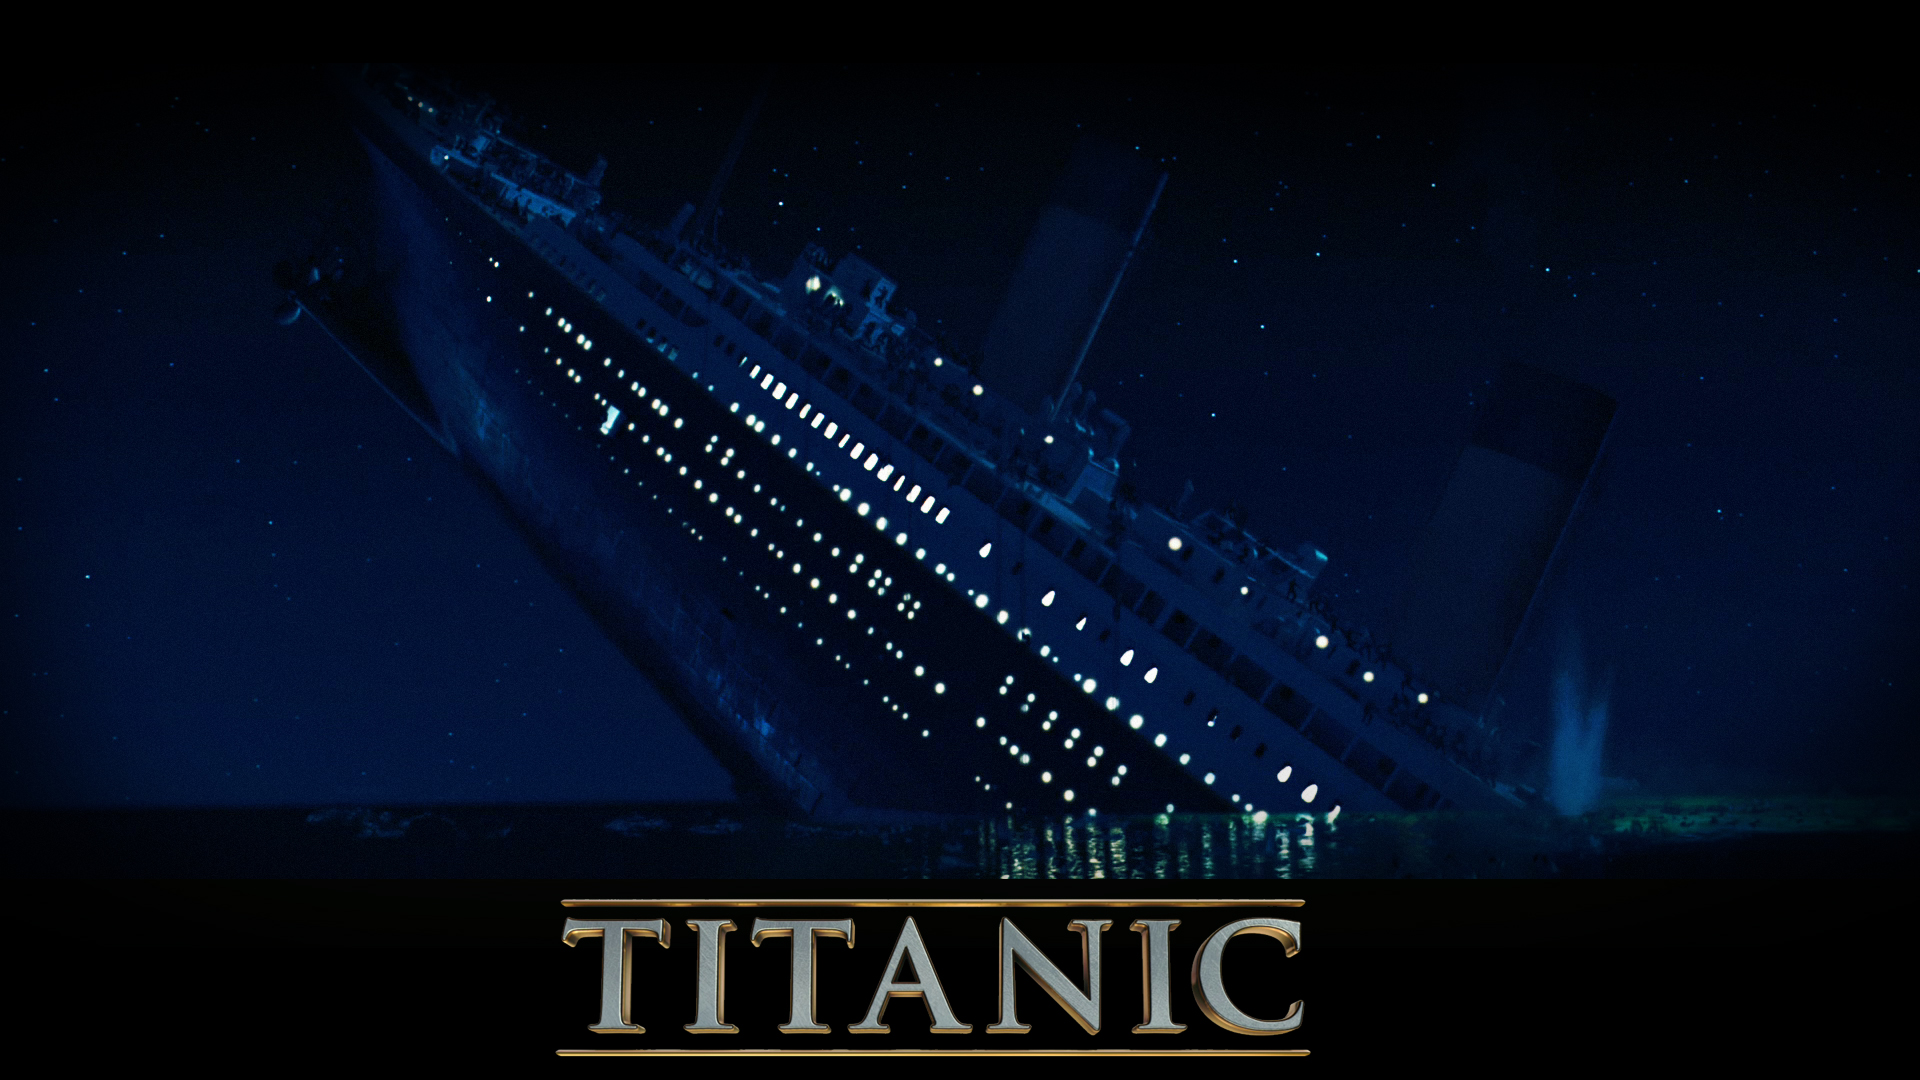 Titanic Ship Wreck 3d Movie Image Gallery Wallpapers 1920